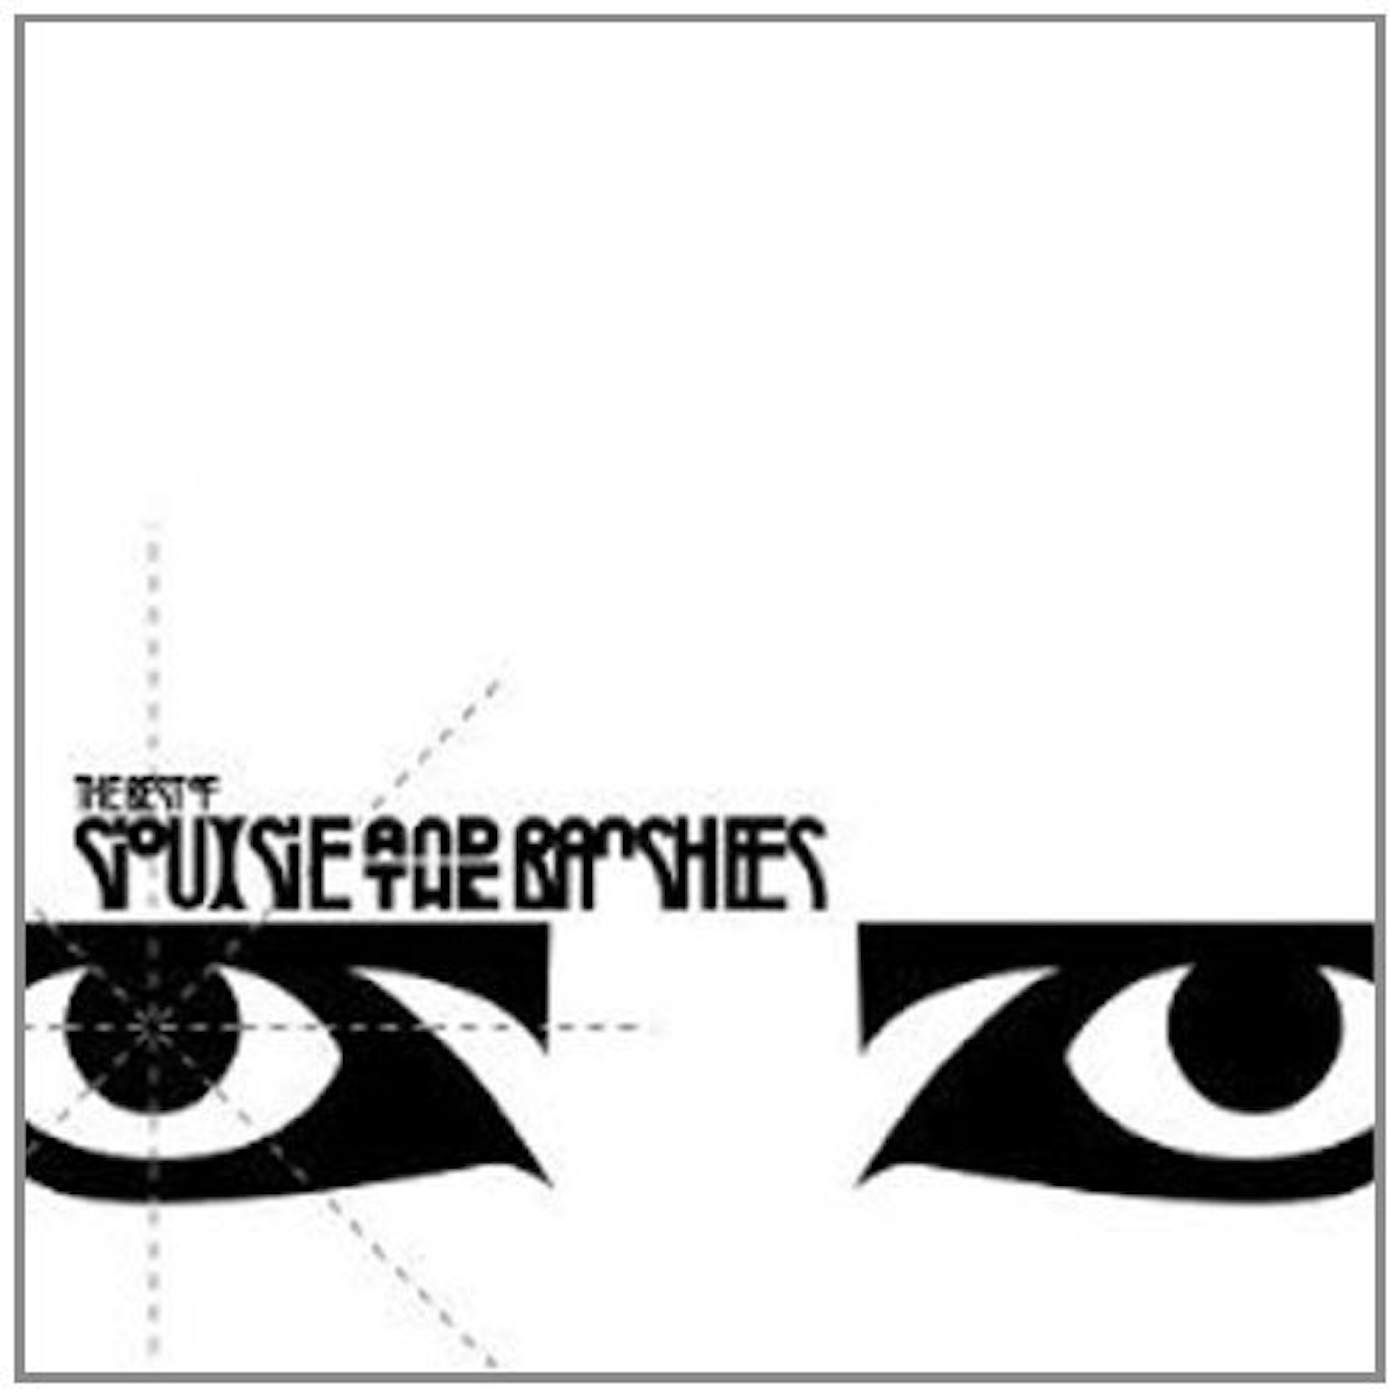 Siouxsie and the Banshees BEST OF CD